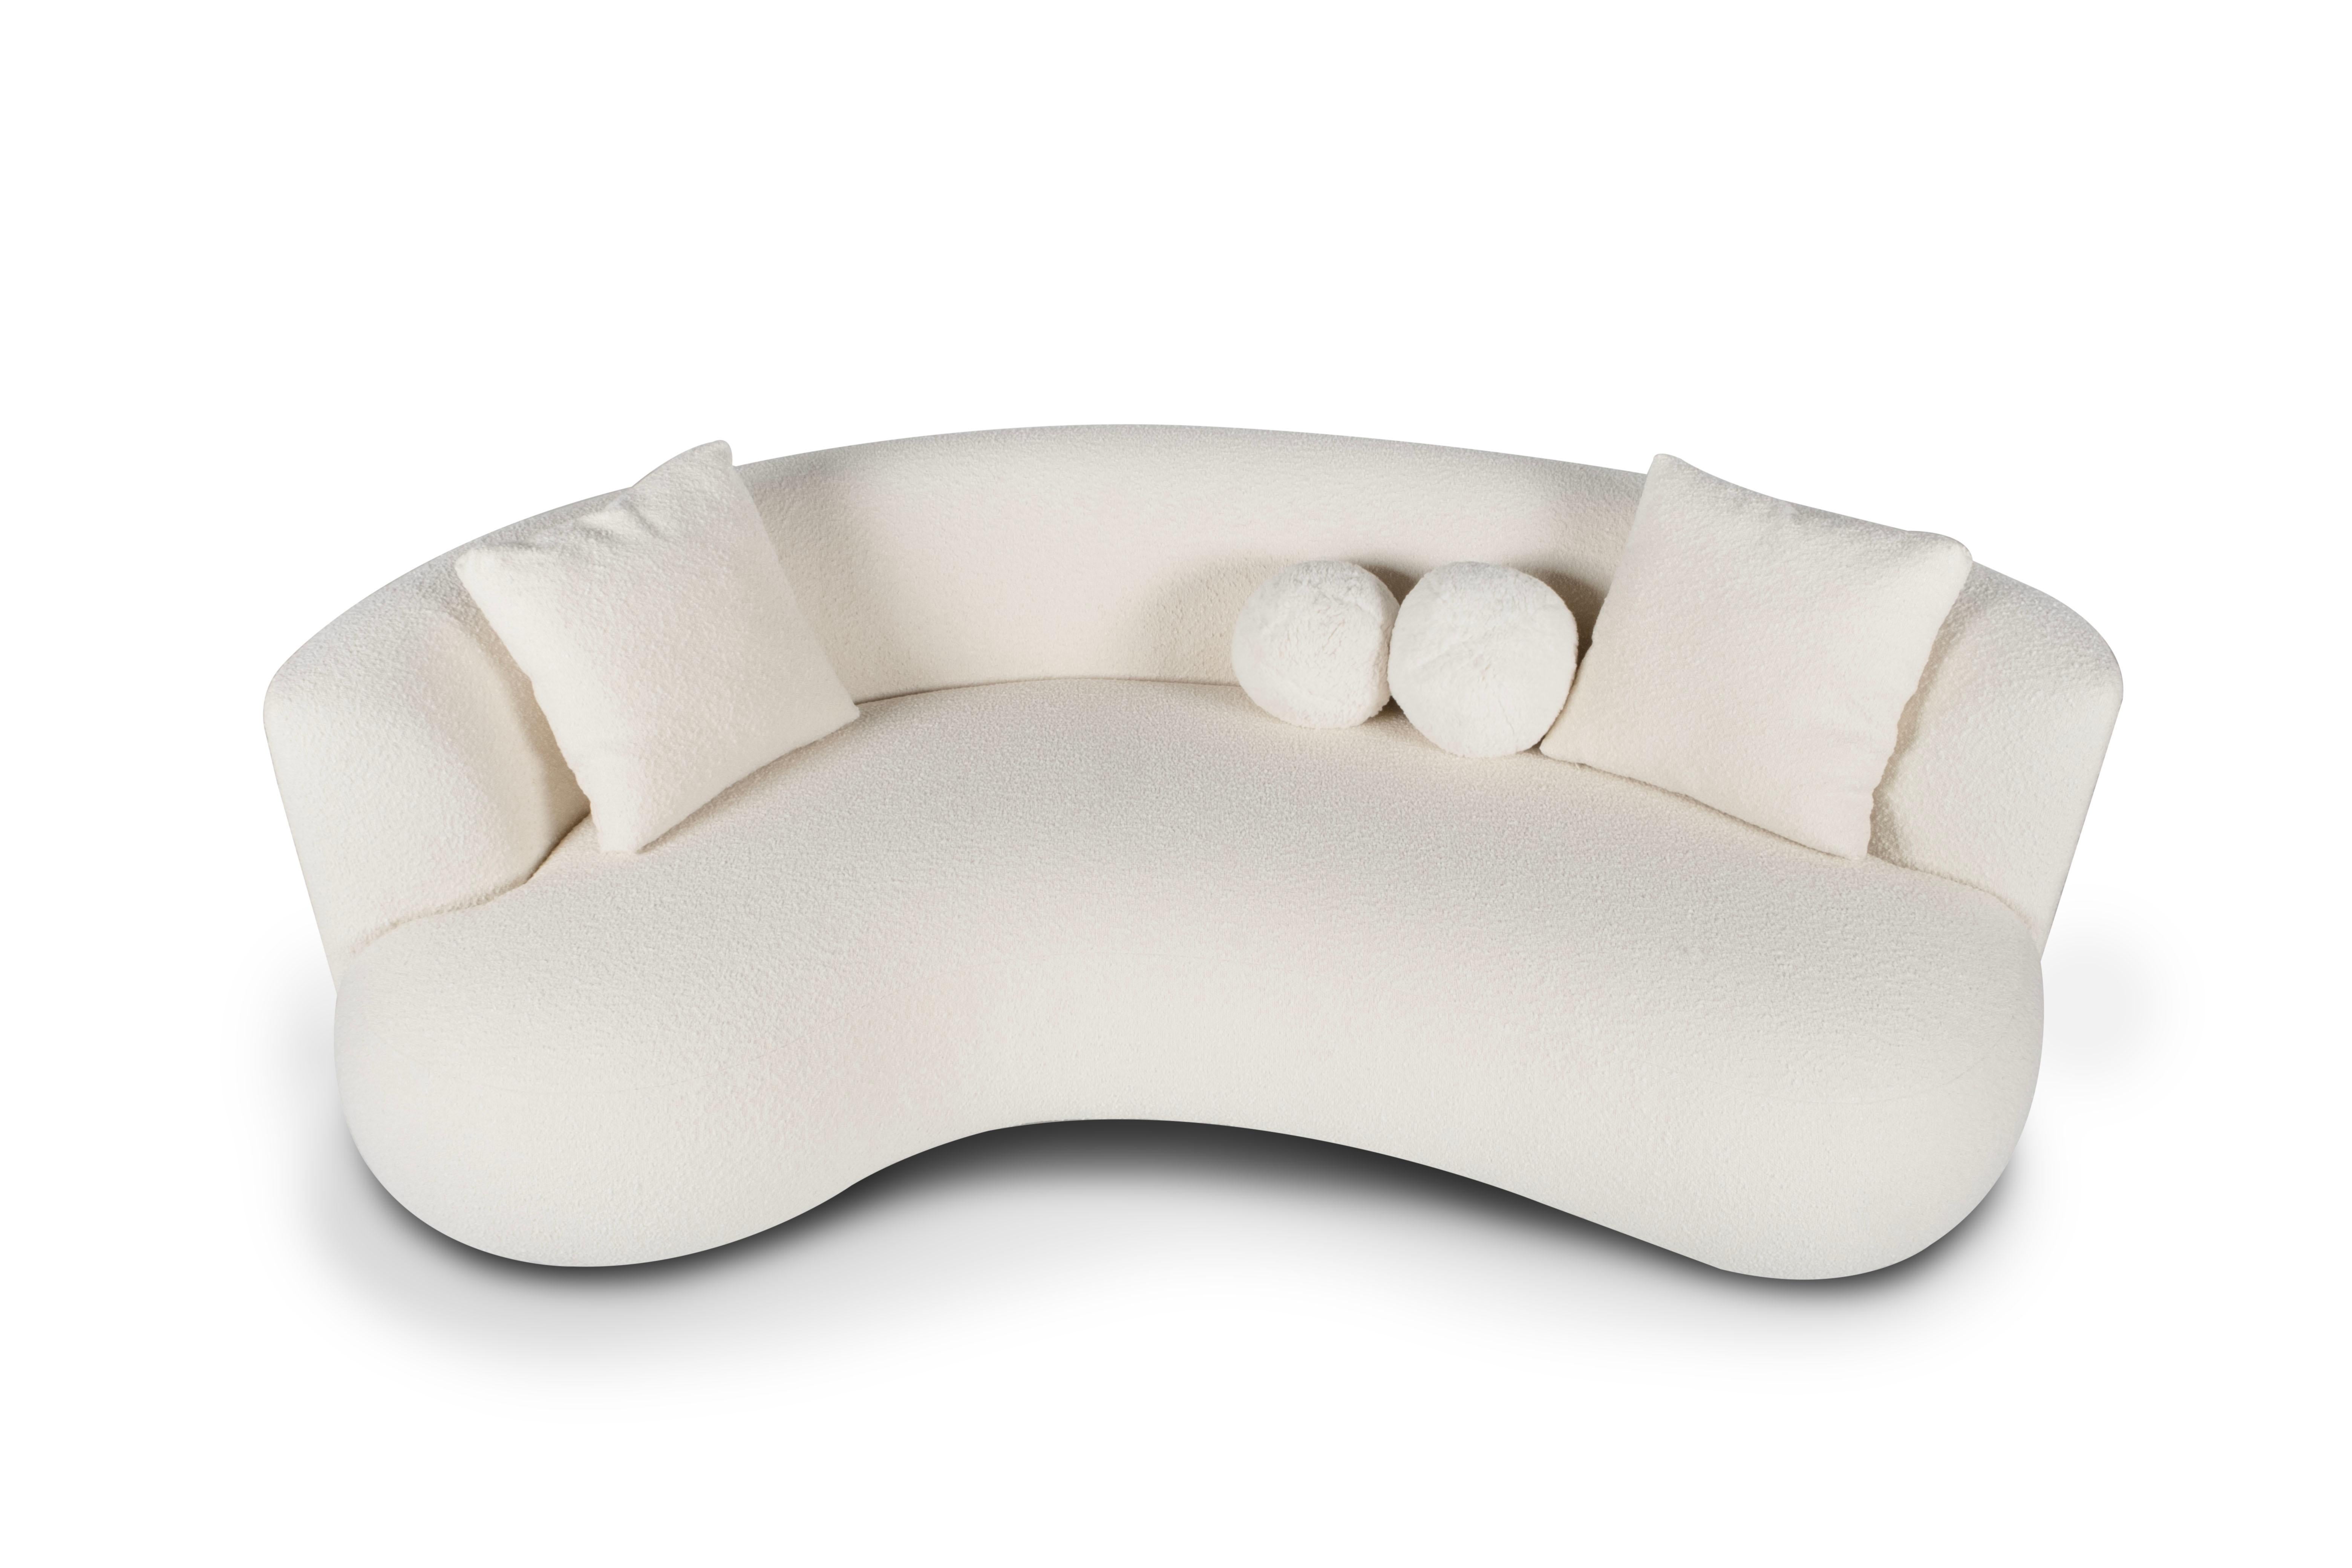 Portuguese Organic Modern Twins Curved Sofa, White Bouclé, Handmade Portugal by Greenapple For Sale